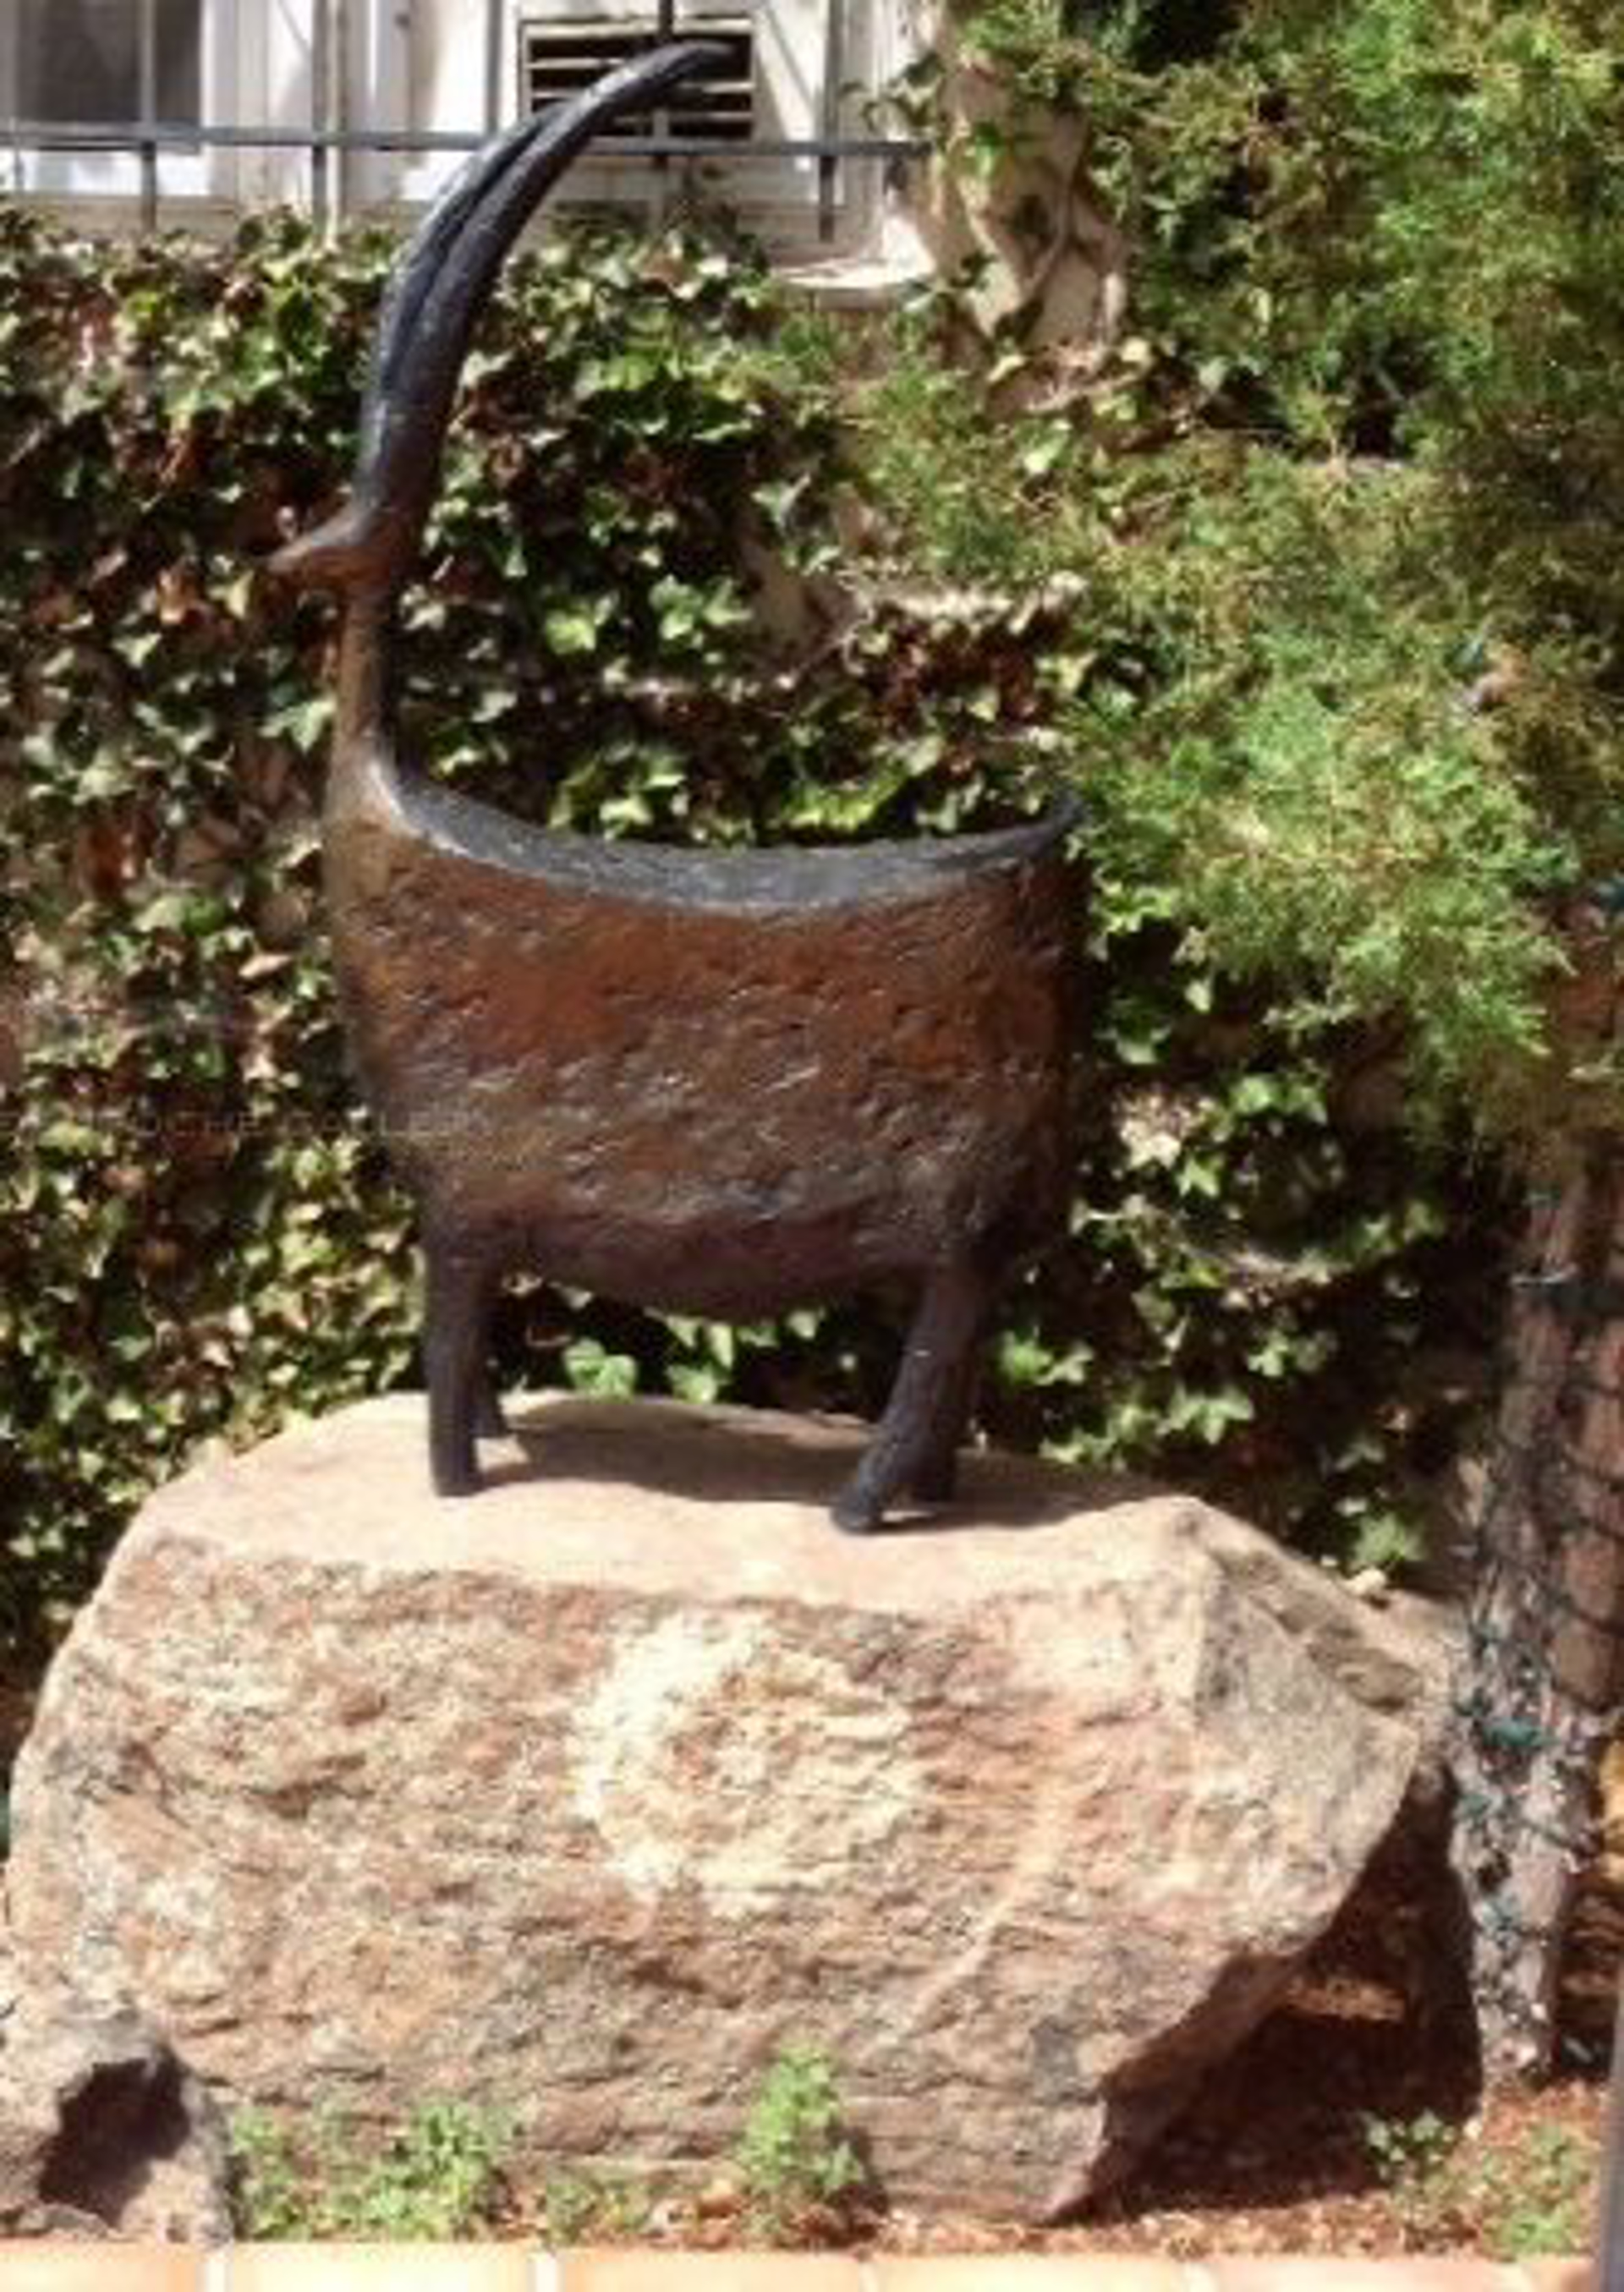 BIG  LISTENER - Bronze Sculpture $10,500 (45"x25"x10) Rock pedestal $1250 (18"x45"x18") May be purchased separately or together for a total of $11,750 by Jill Shwaiko